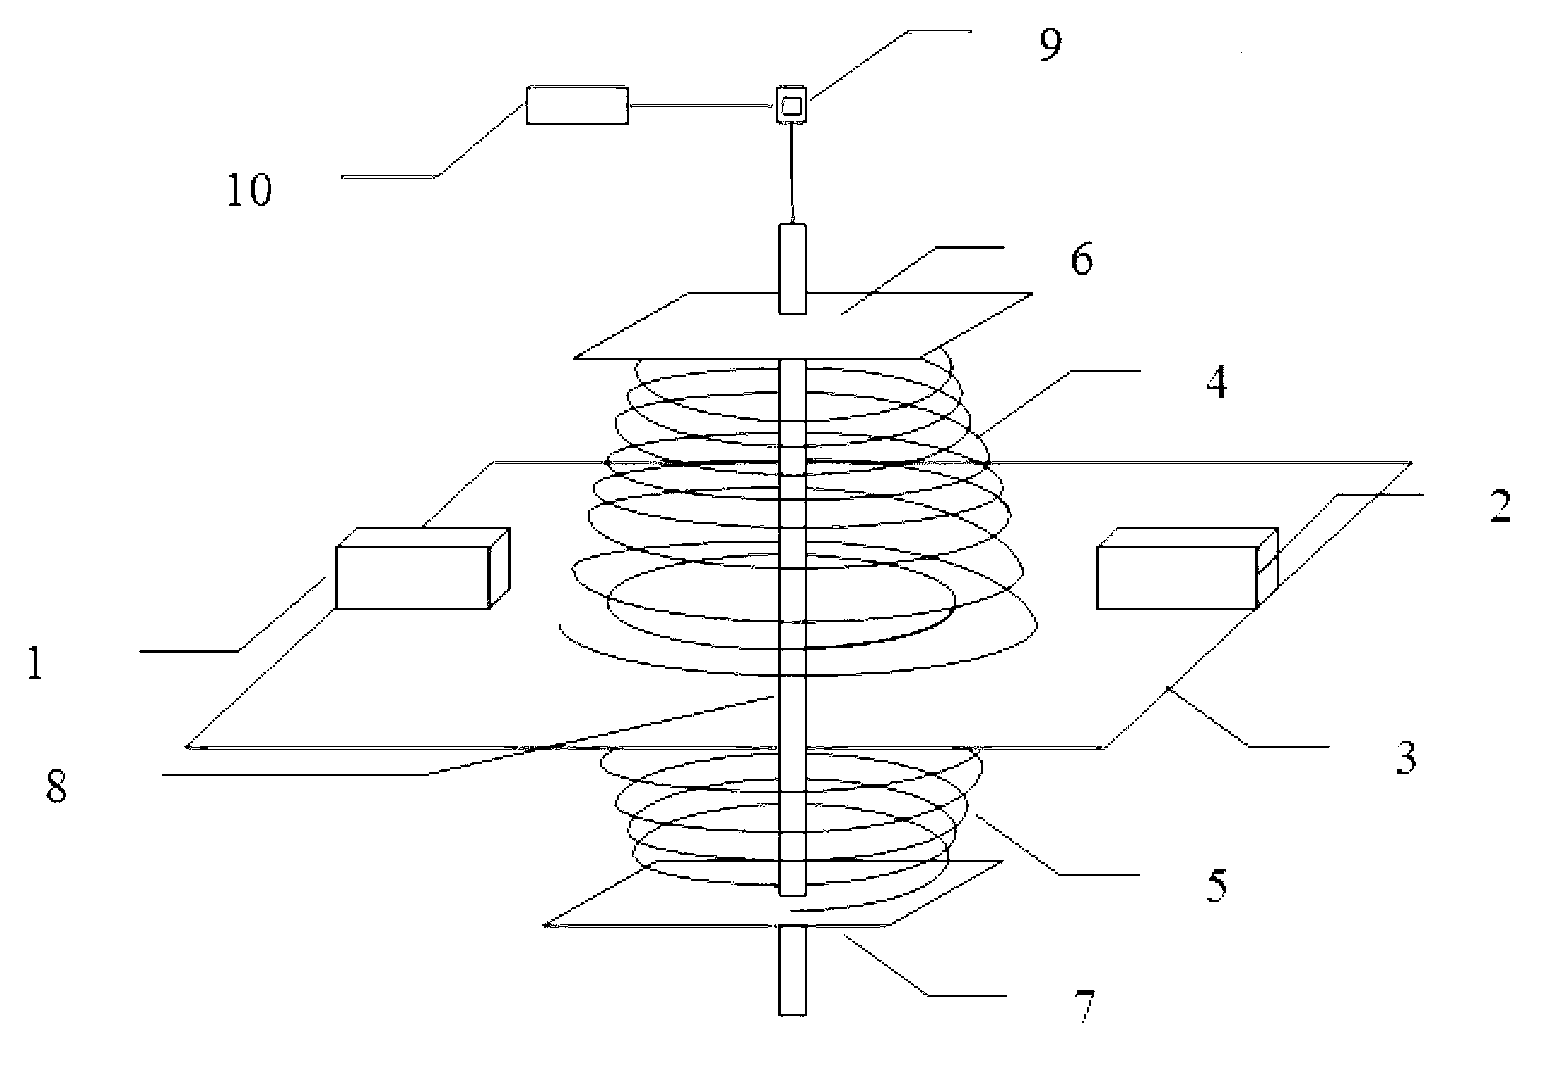 Semi-driving type variable stiffness dynamic vibration absorber made from conical springs